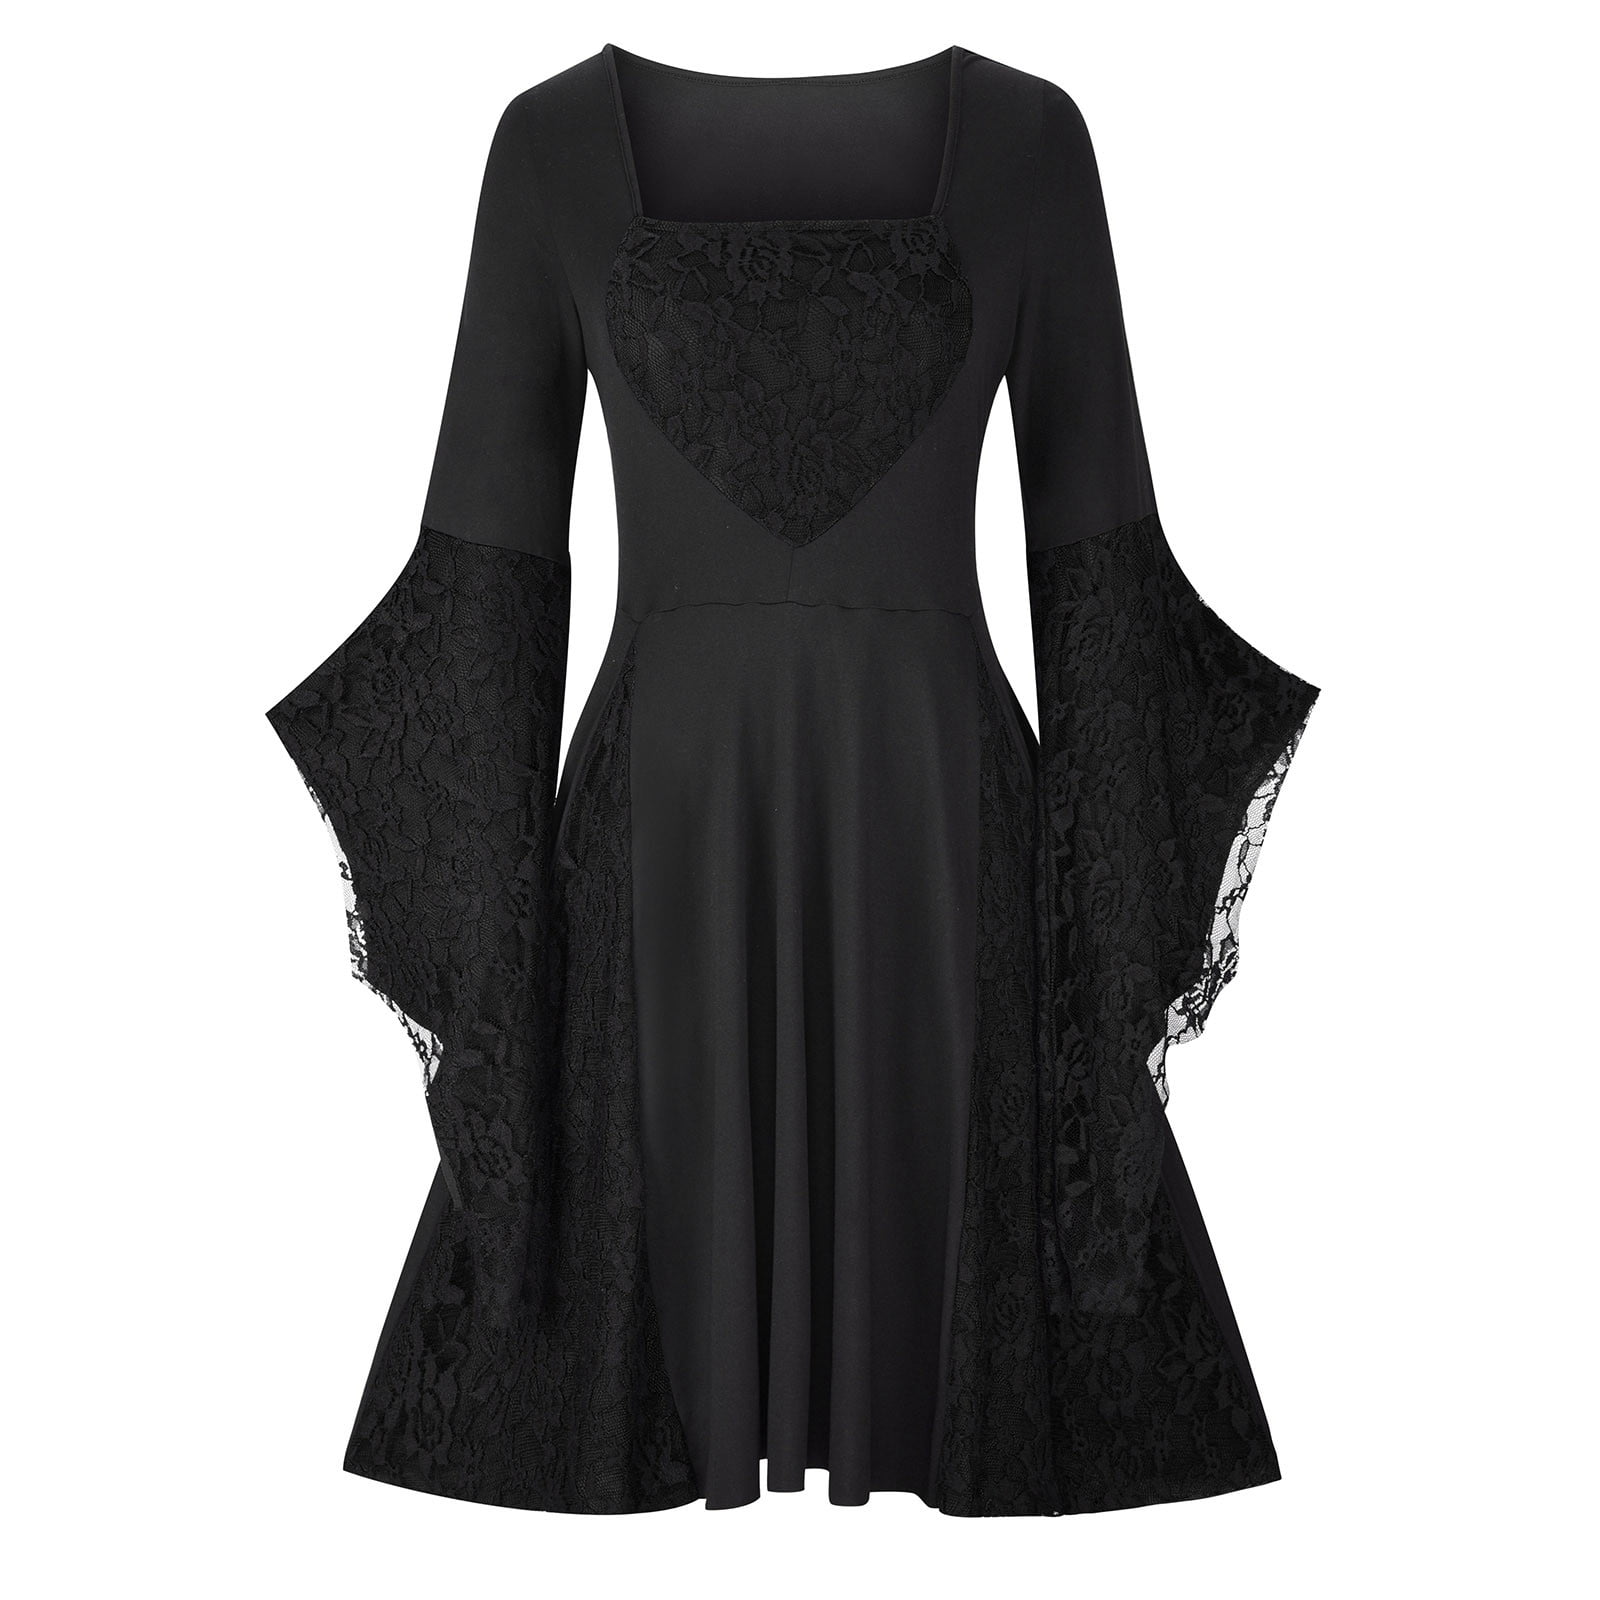 Usmixi Women Lace Gothic Dresses Hallow-een Party Retro Flared Sleeve ...